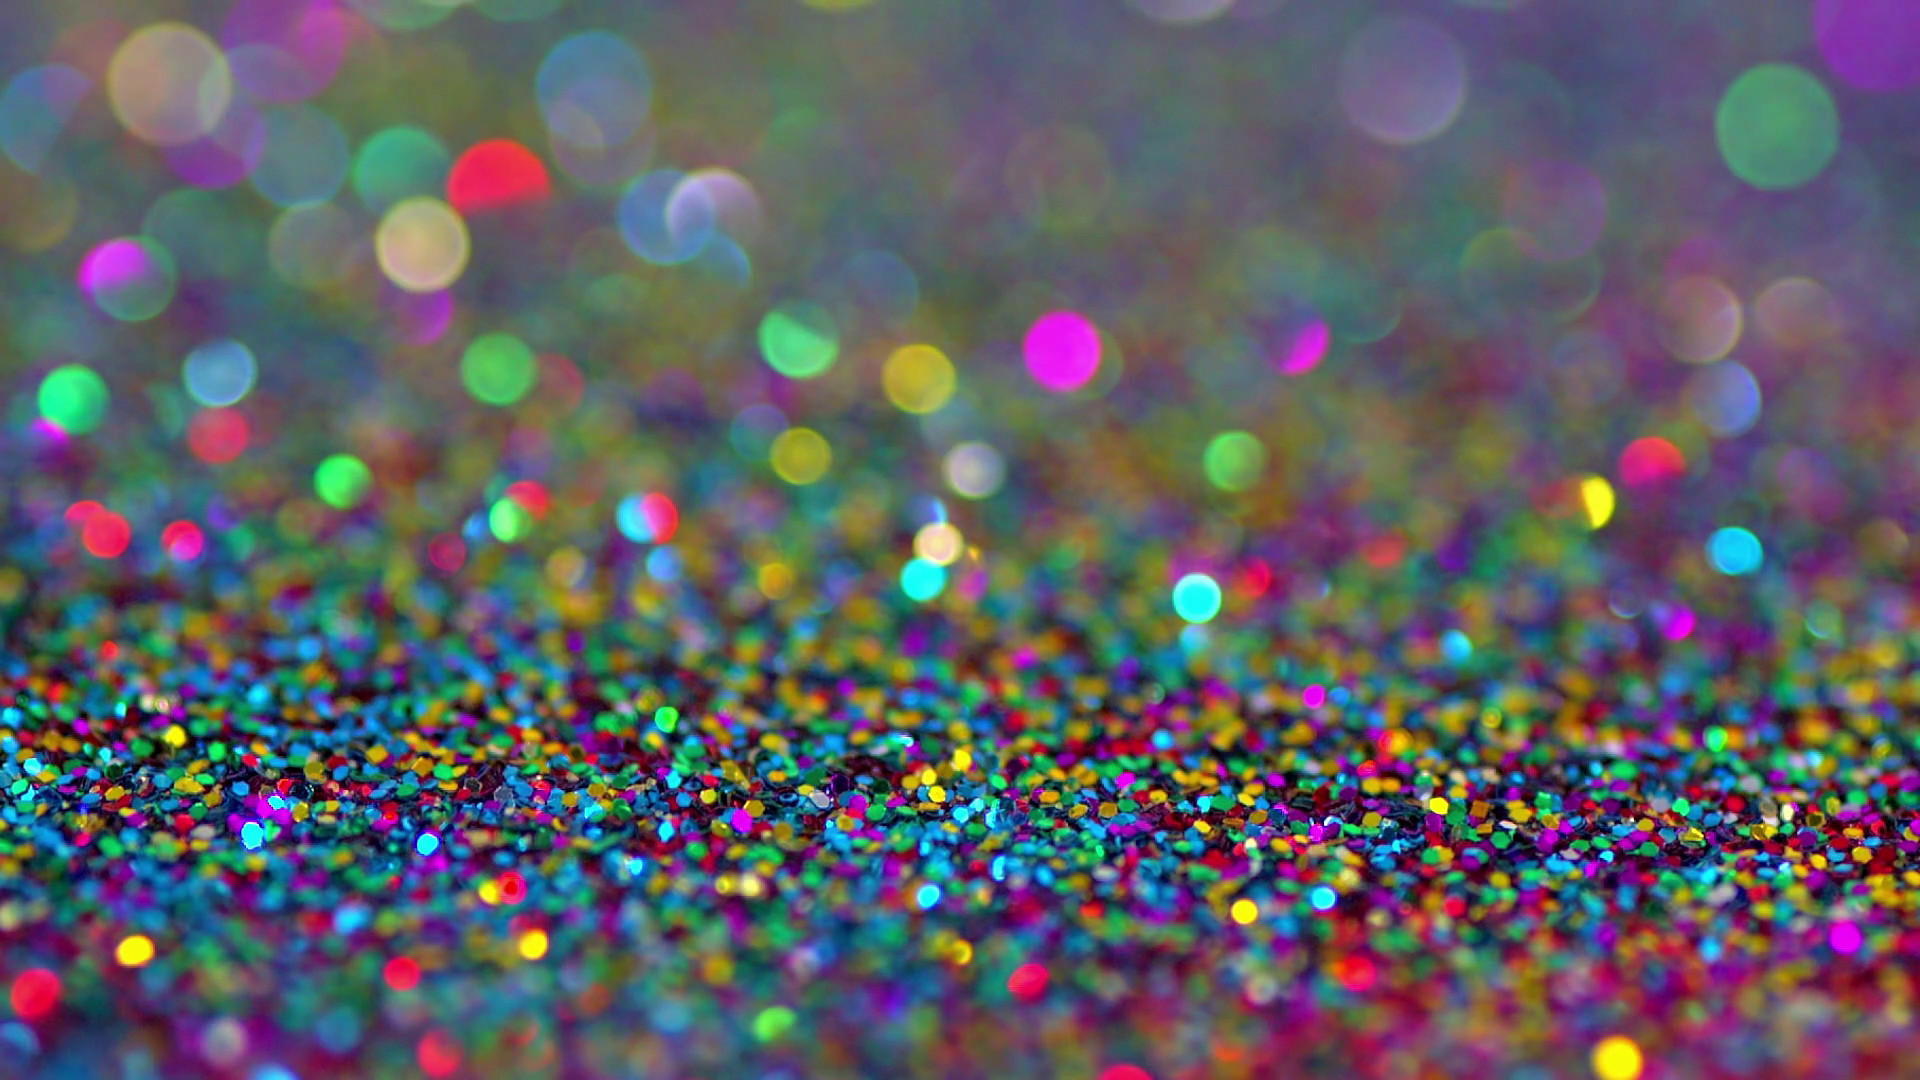 1920x1080 Glamorous sparkly background texture from real glitter